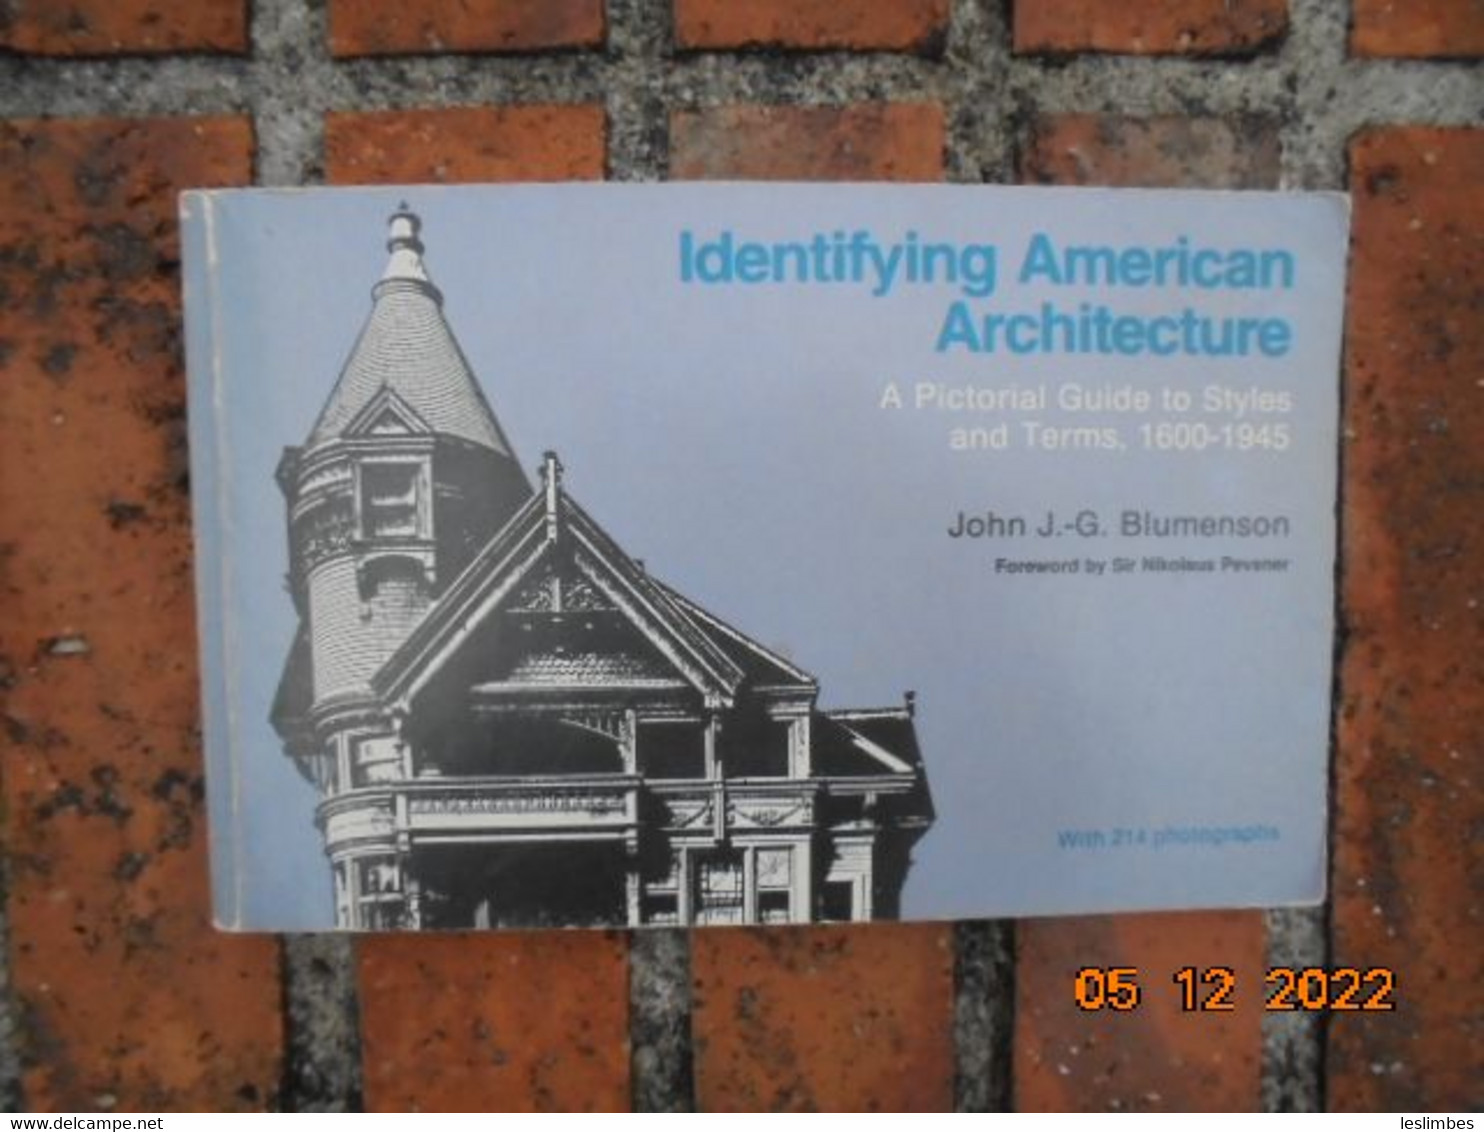 Identifying American Architecture: A Pictorial Guide To Styles And Terms 1600-1945 By John J. G. Blumenson - Architettura